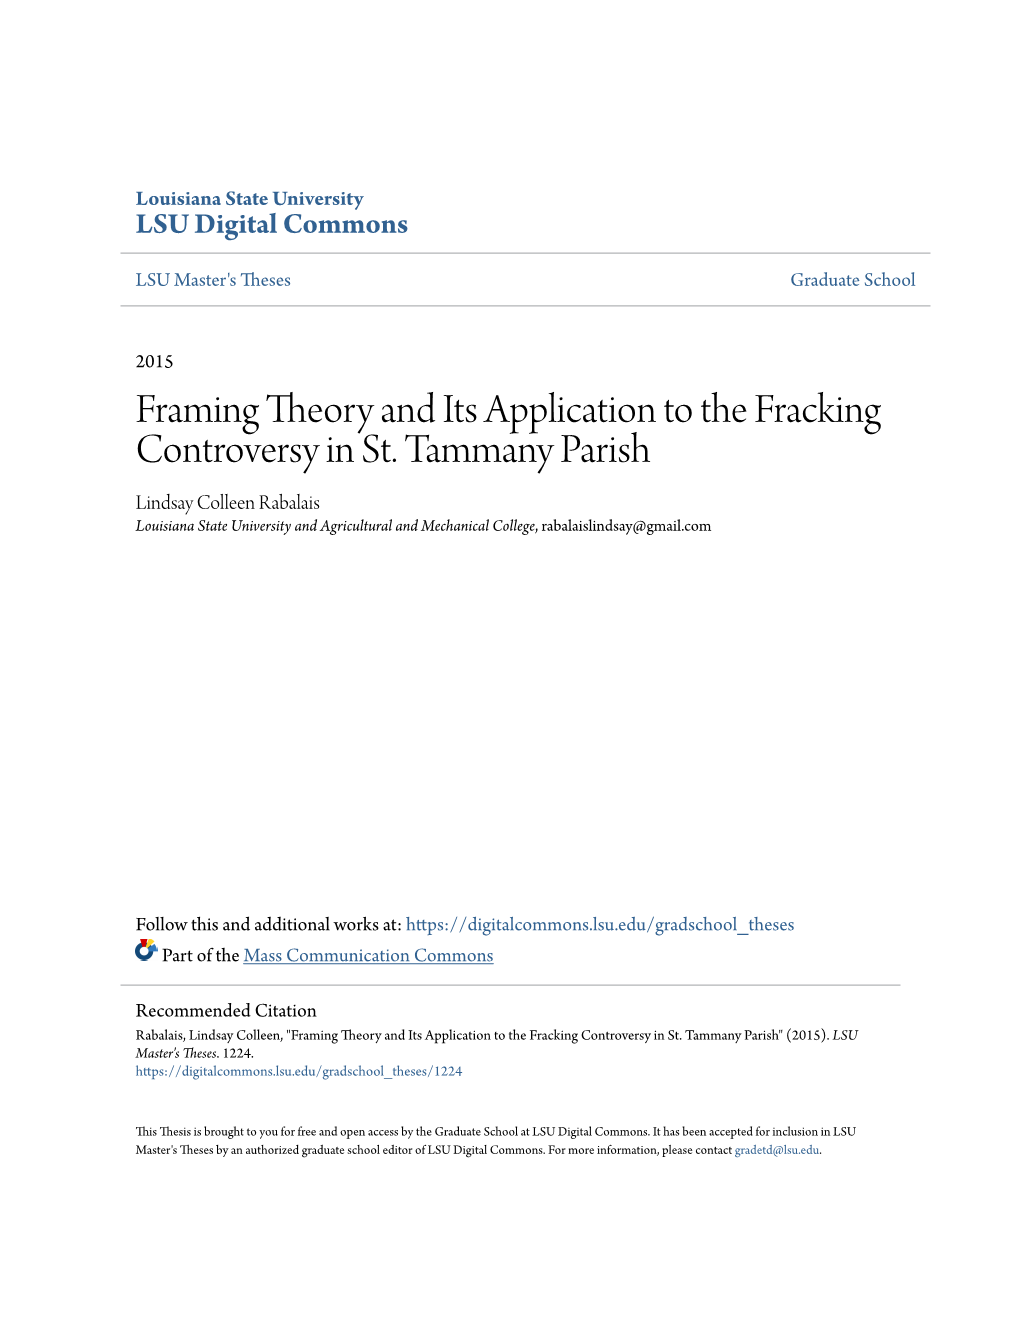 Framing Theory and Its Application to the Fracking Controversy in St